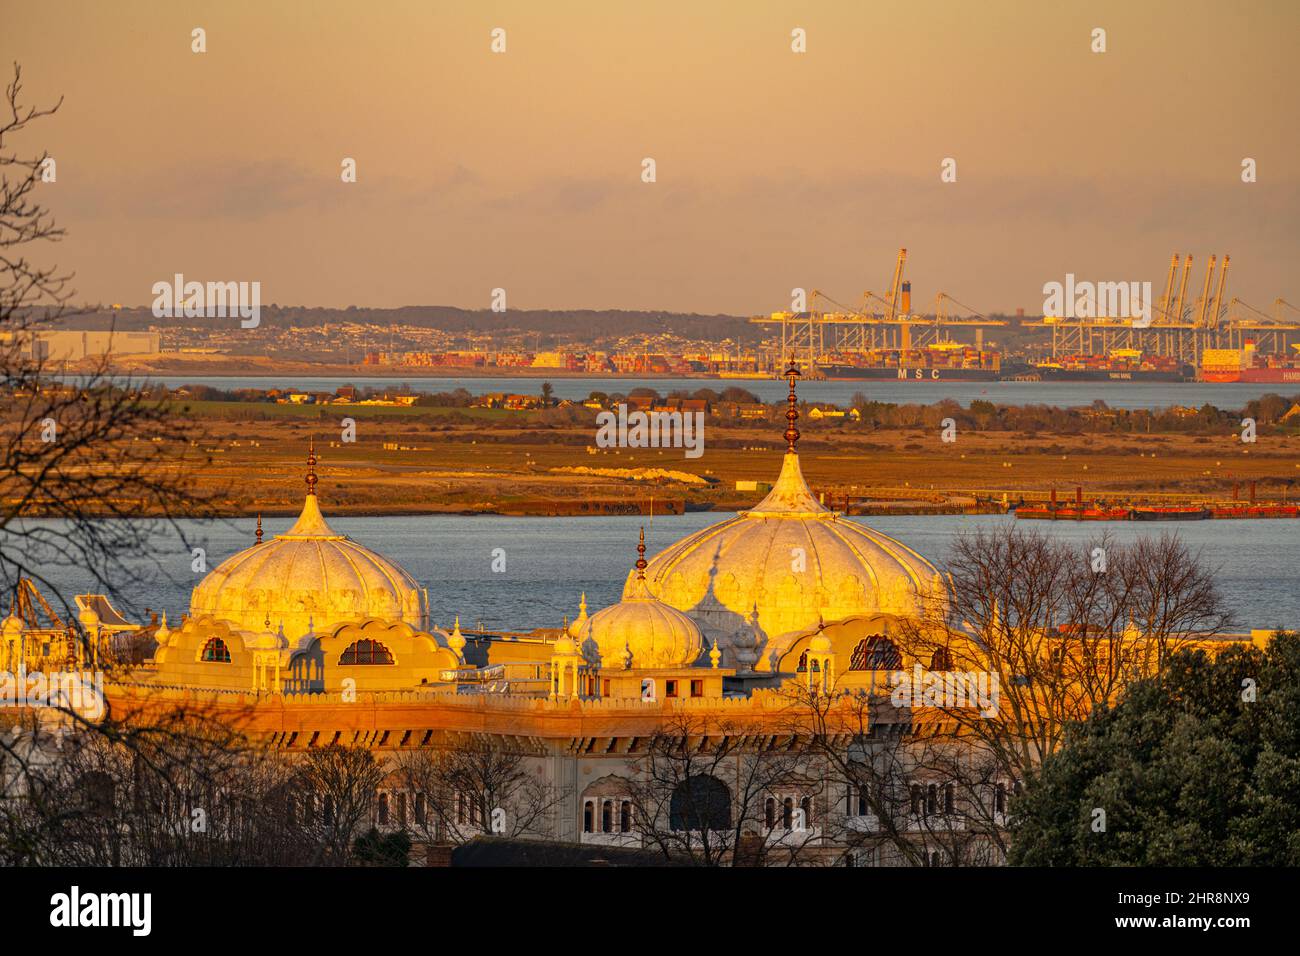 Looking towards Thames Gateway port with the domes of the  Guru Nanak Darbar Gurdwara in Gravesend in foreground at sunset Stock Photo